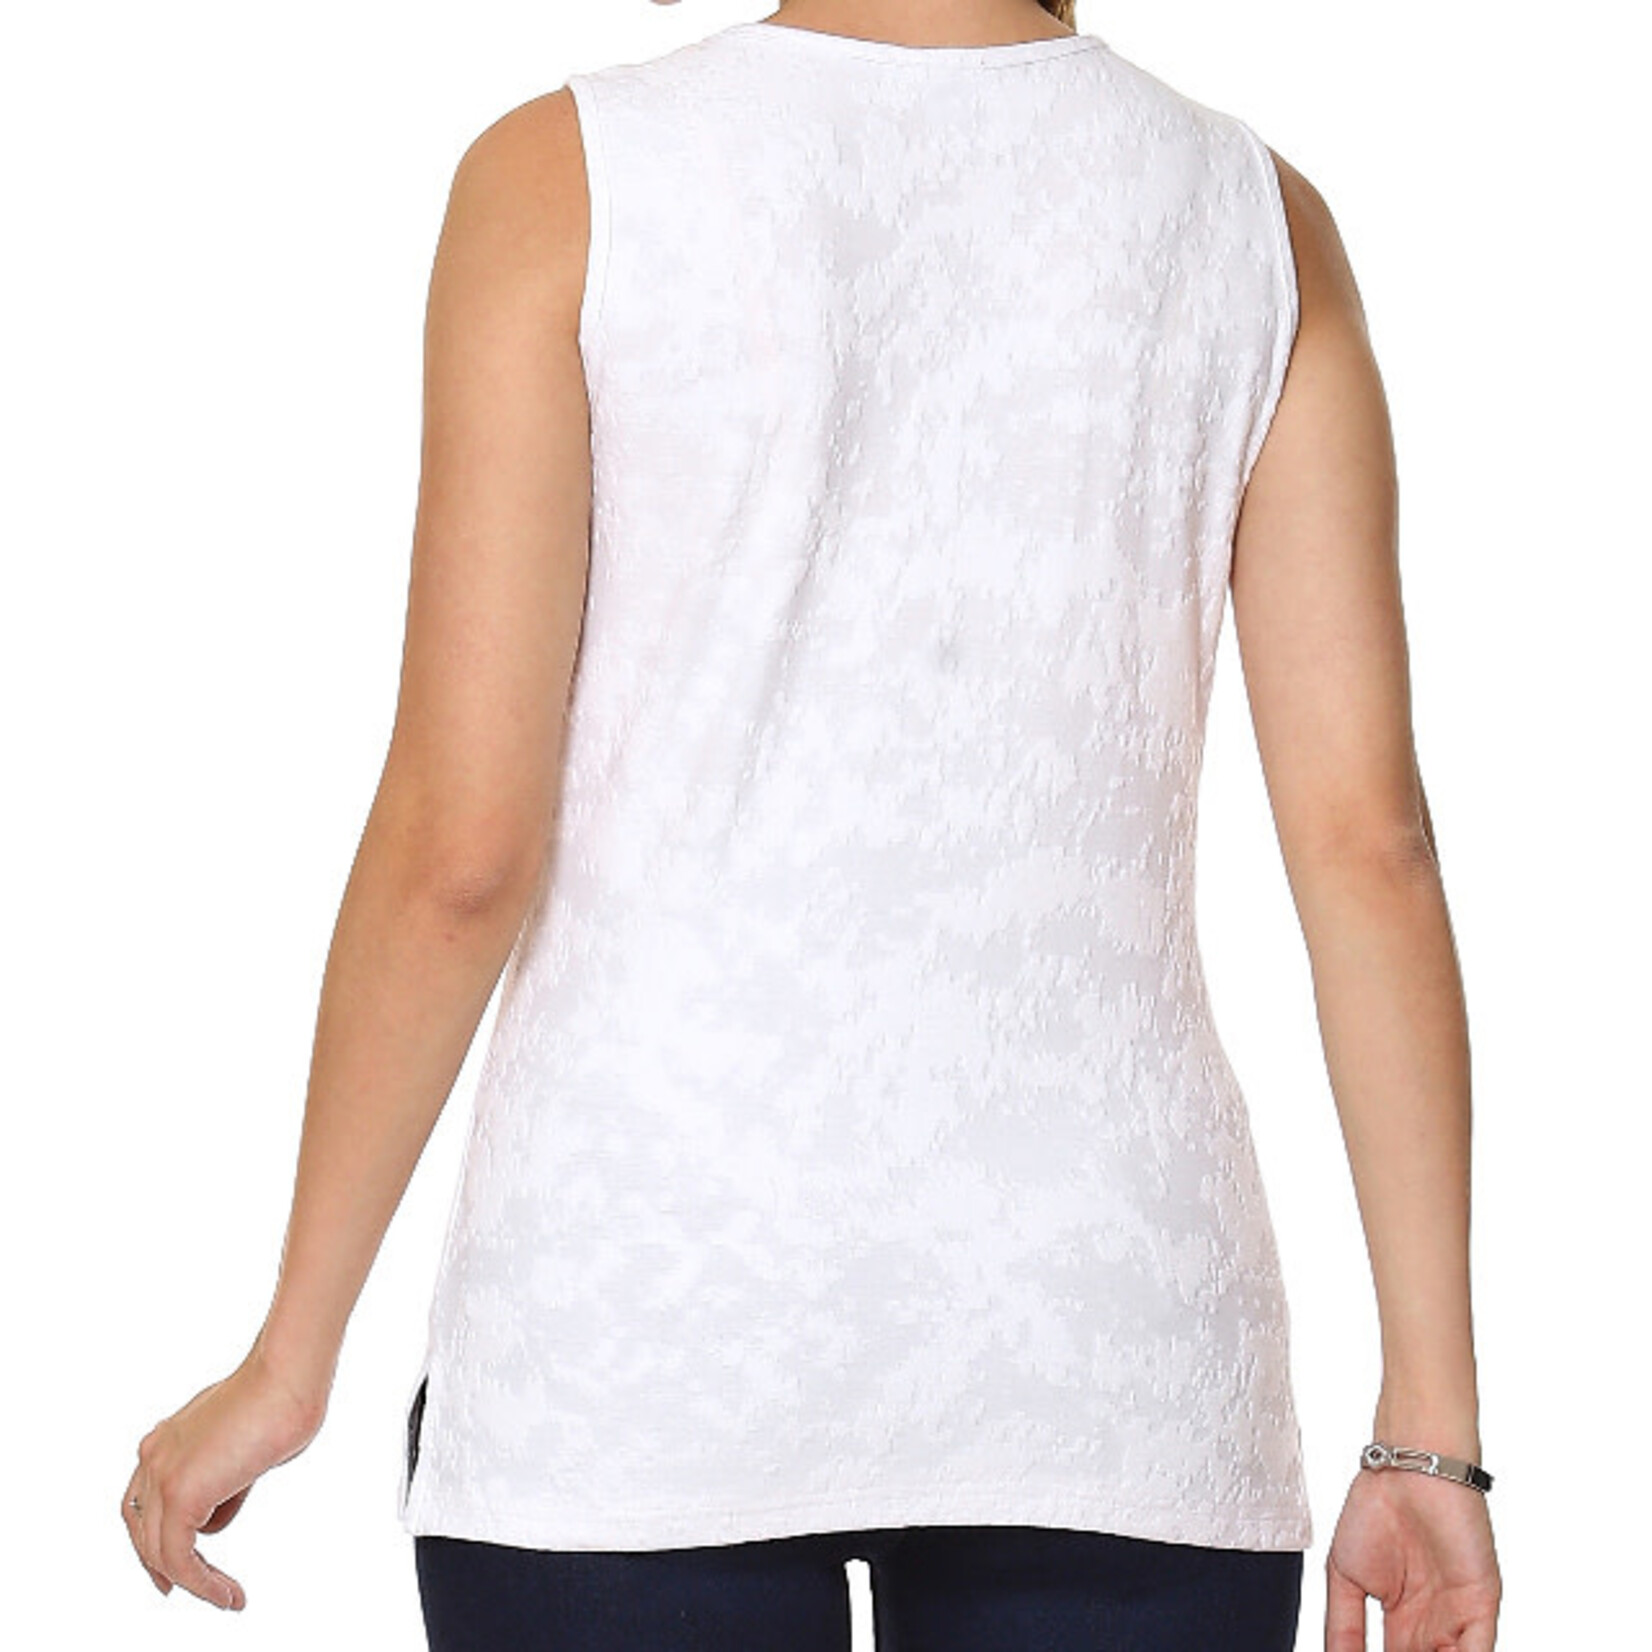 Parsley and Sage White Textured Tank Top